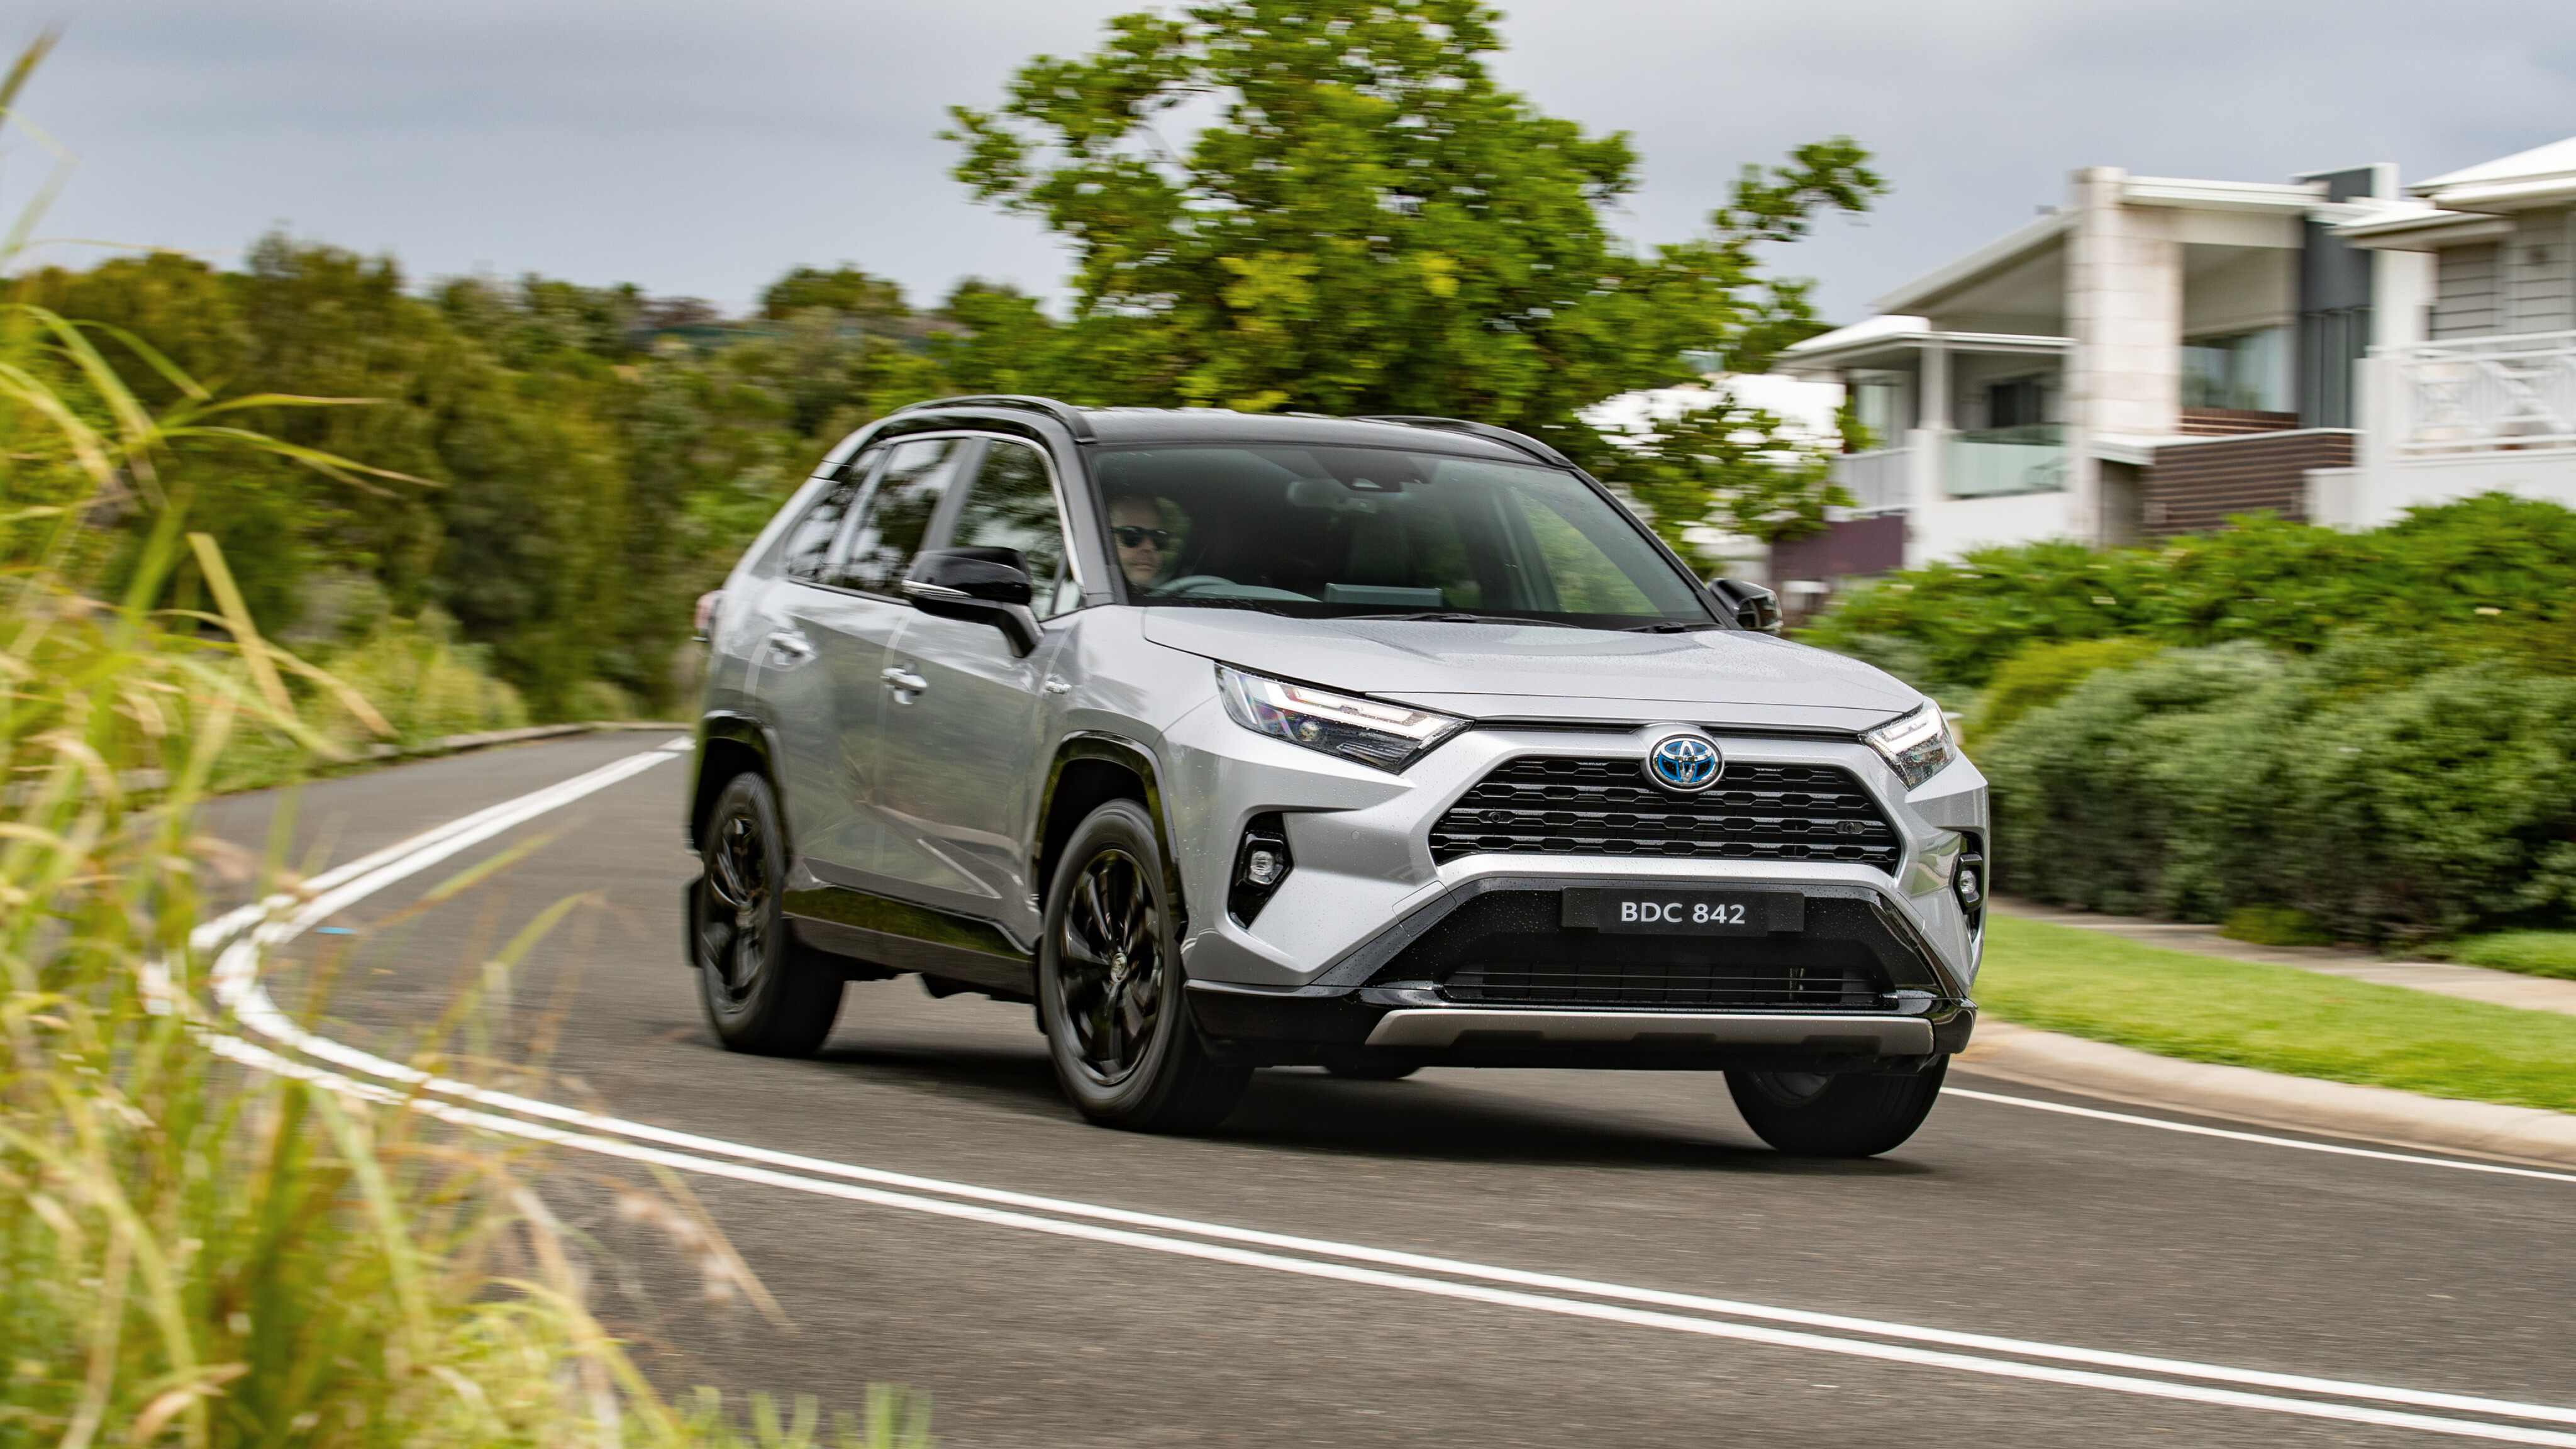 New hybrid hero! 2023 Honda ZR-V mid-size SUV locked in for Australian  arrival with hybrid from launch - is it a new Toyota RAV4 rival? - Car News